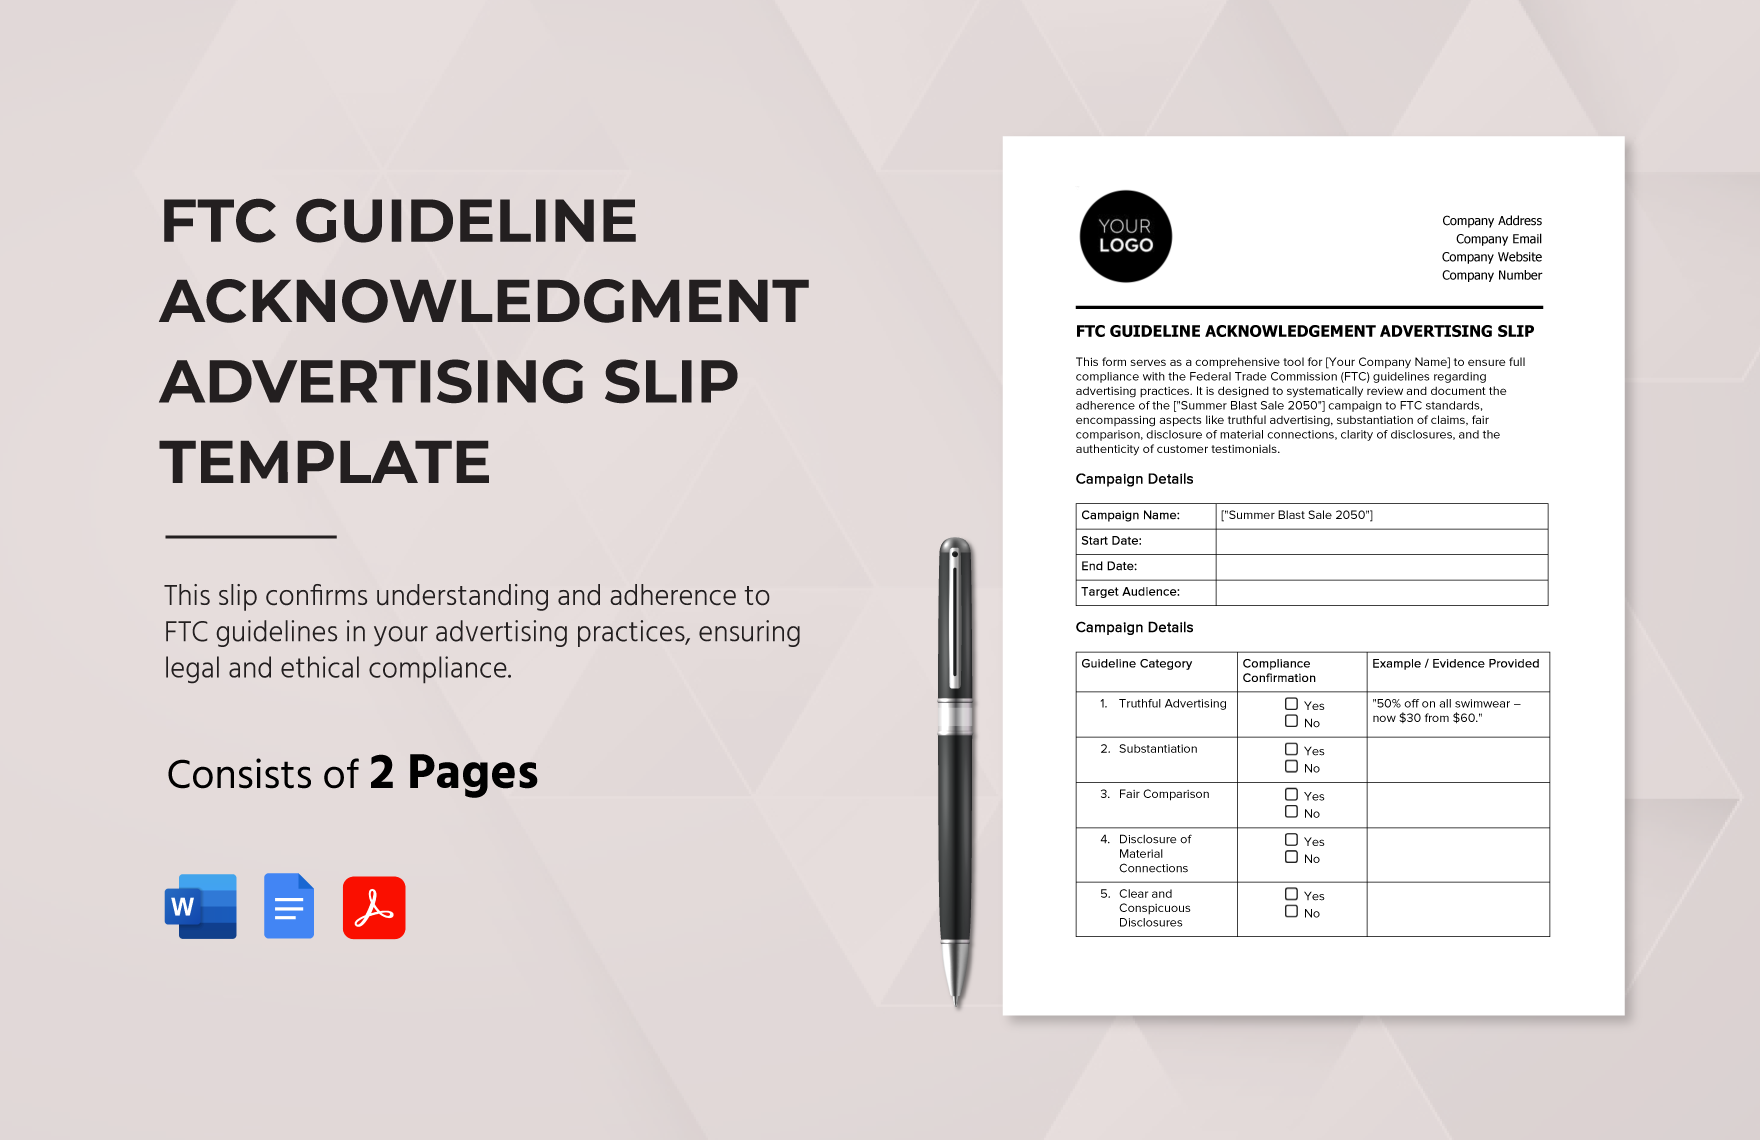 FTC Guideline Acknowledgment Advertising Slip Template in Word, Google Docs, PDF